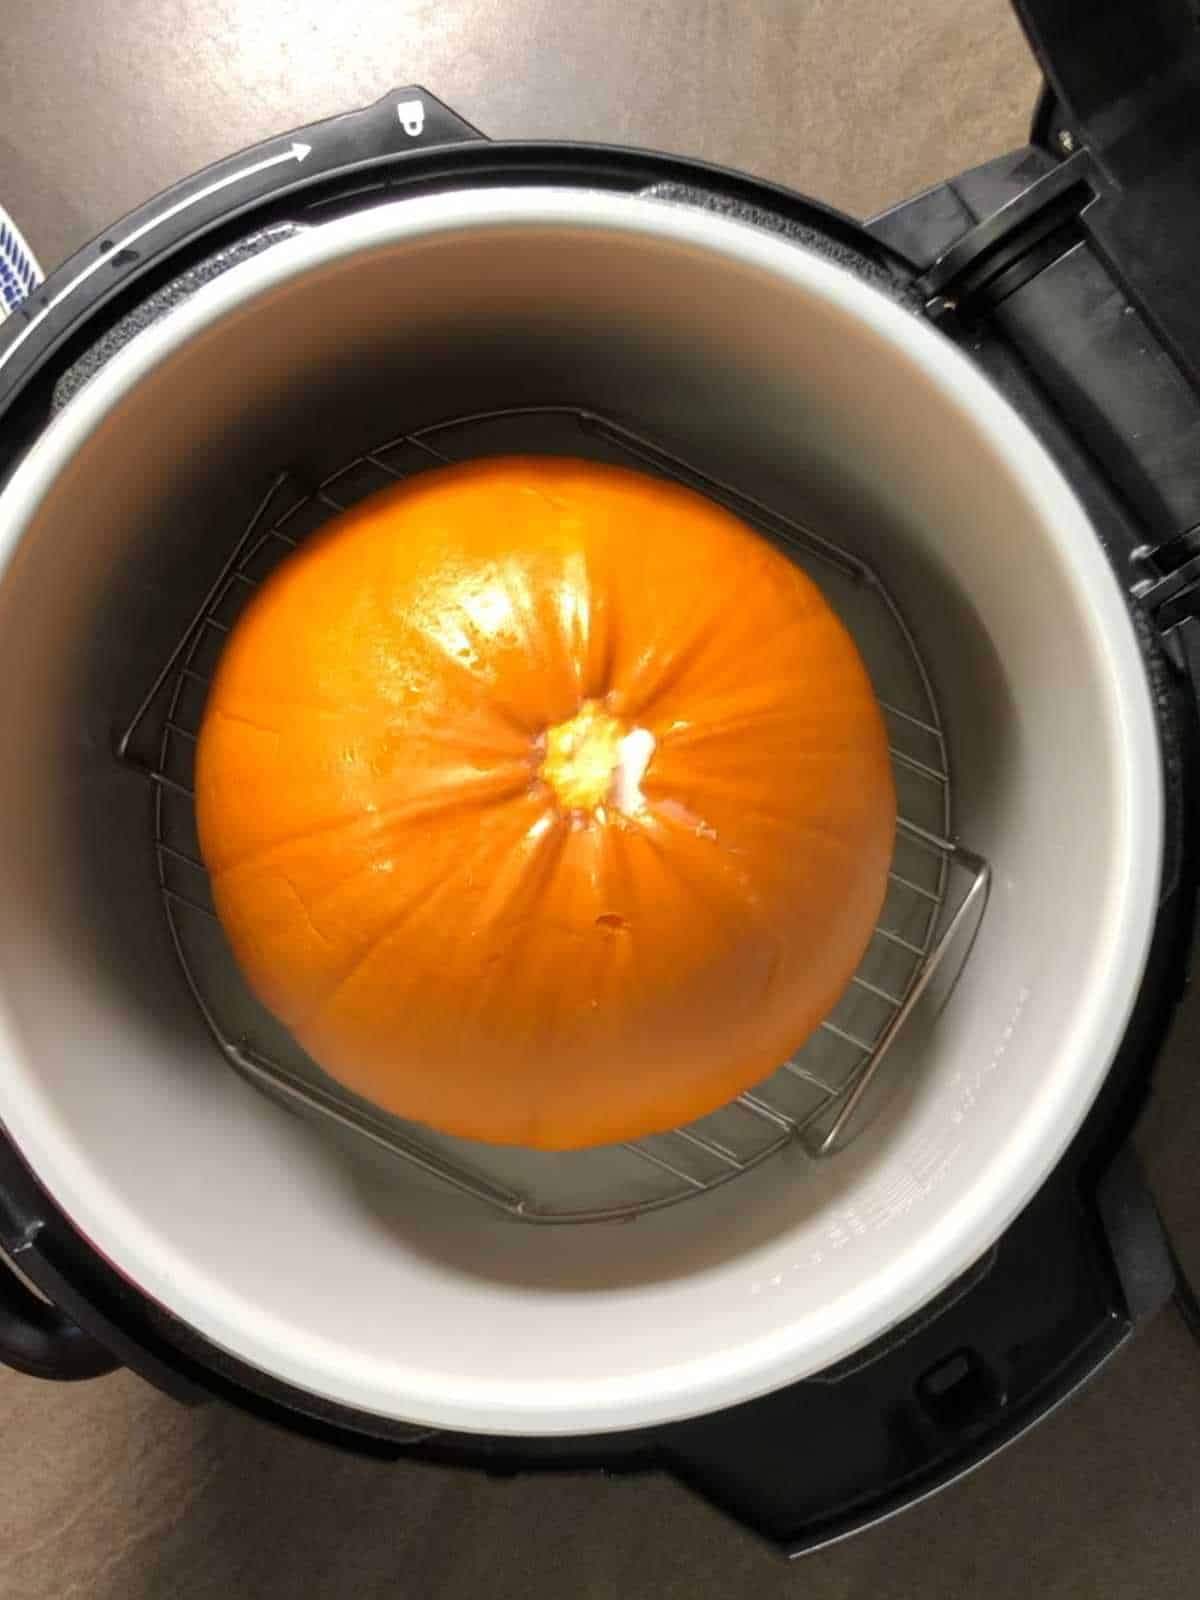 Photo of the equipment necessary to pressure cook a whole raw pumpkin in an instant pot / Ninja electric pressure cooker